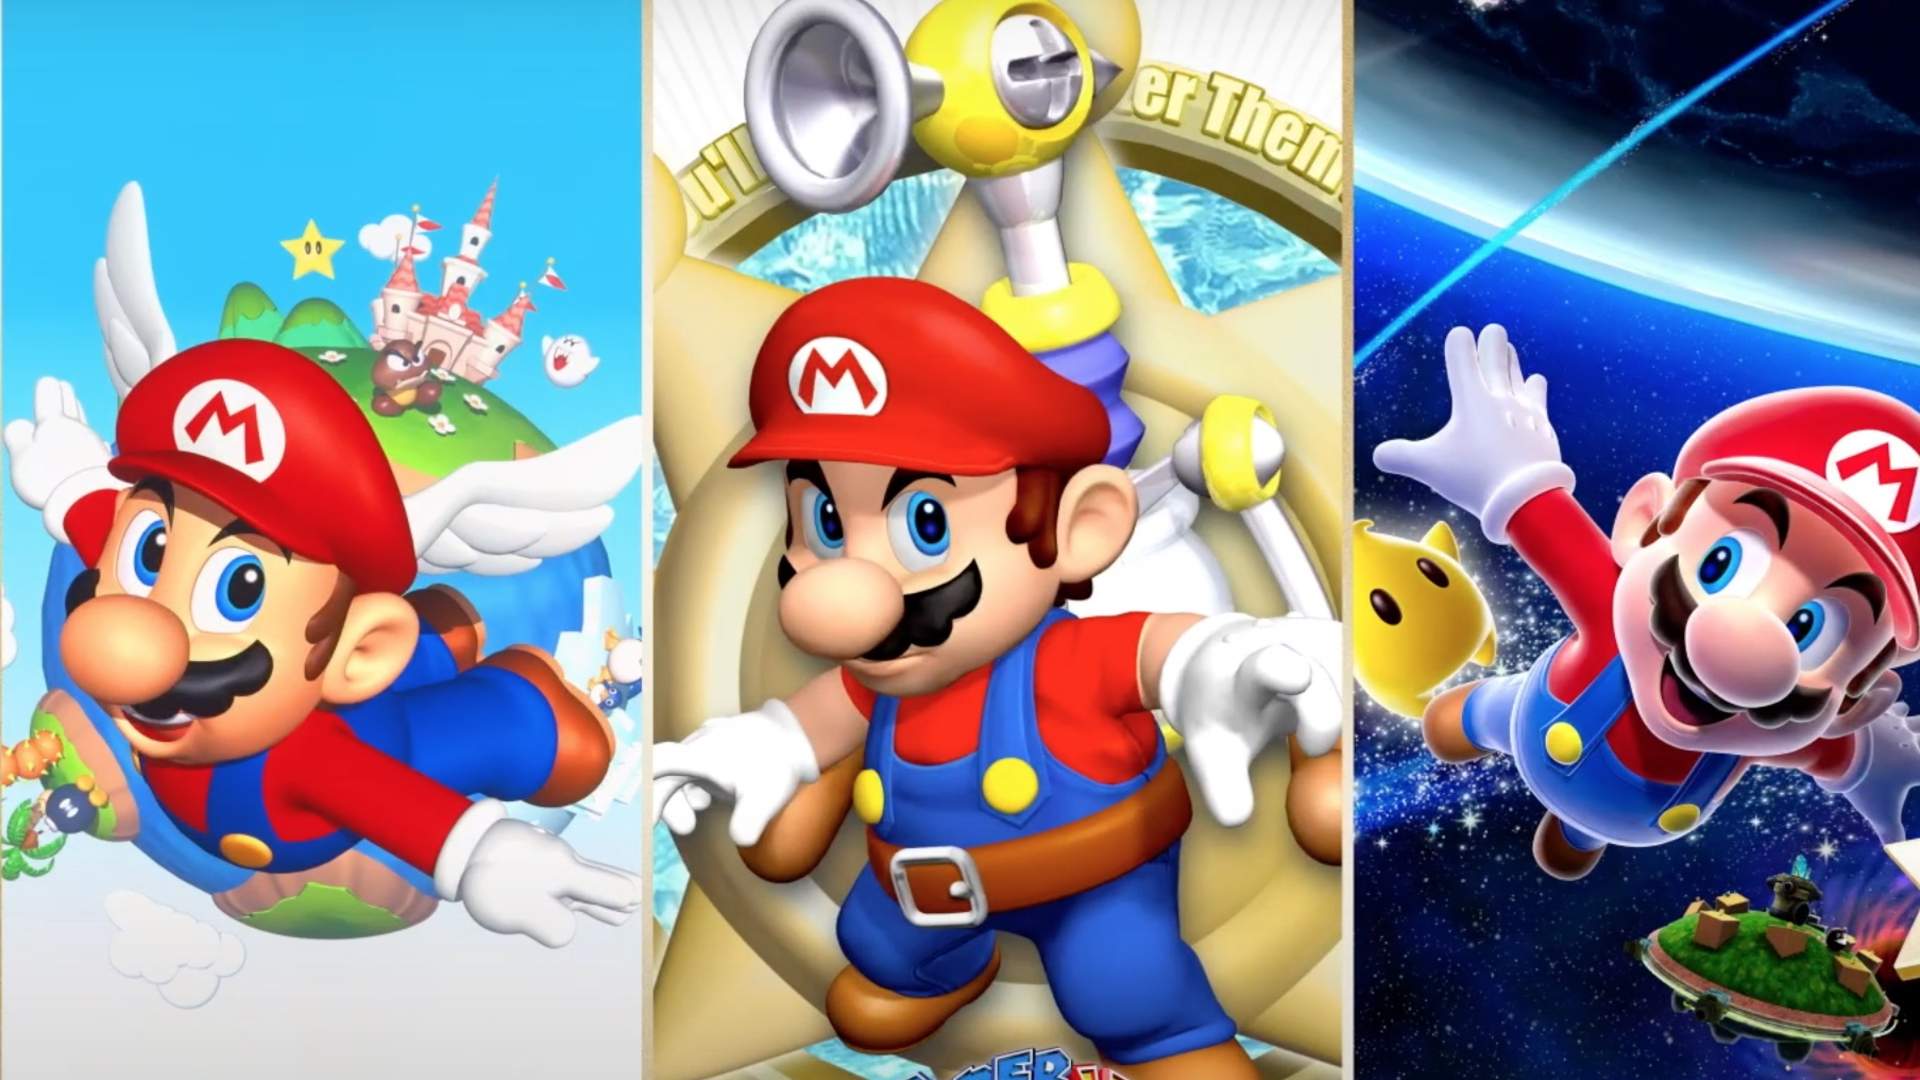 Nintendo Reveals Super Mario 3D All Stars Remaster Collection, Launching This Month